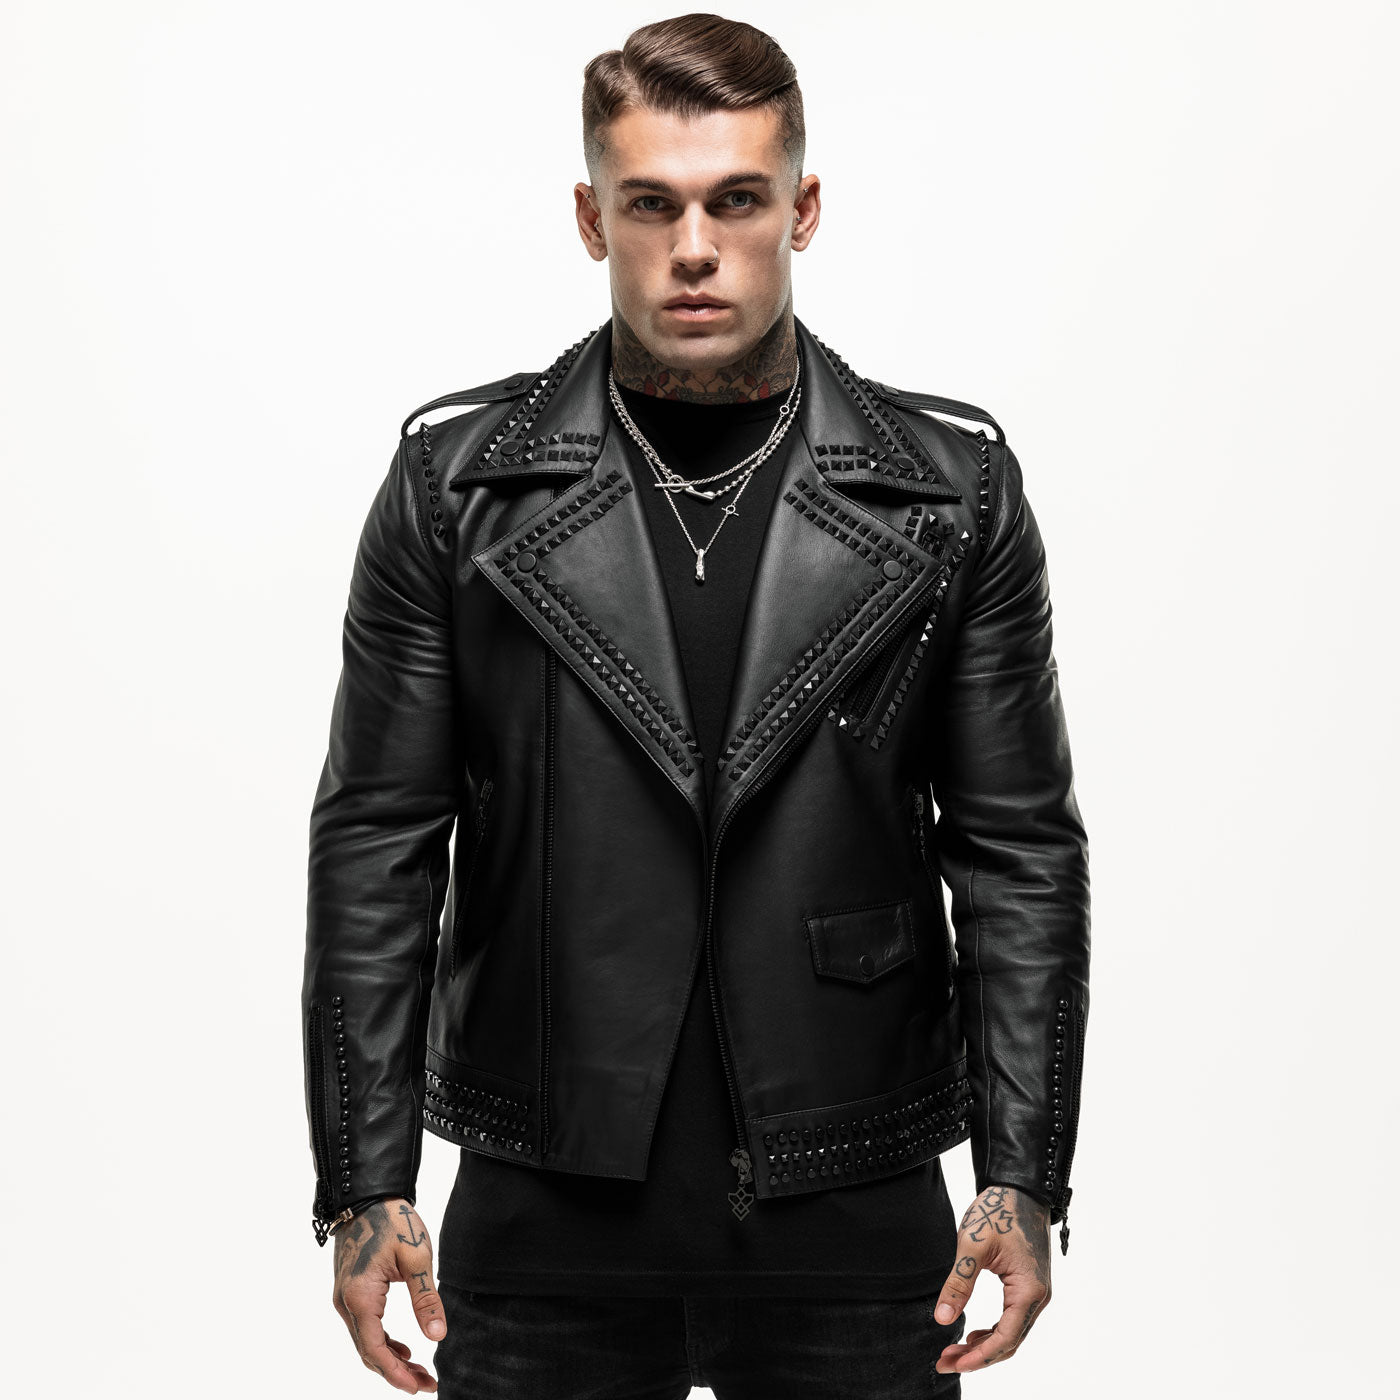 Panther Edition Black Studded Leather Jacket